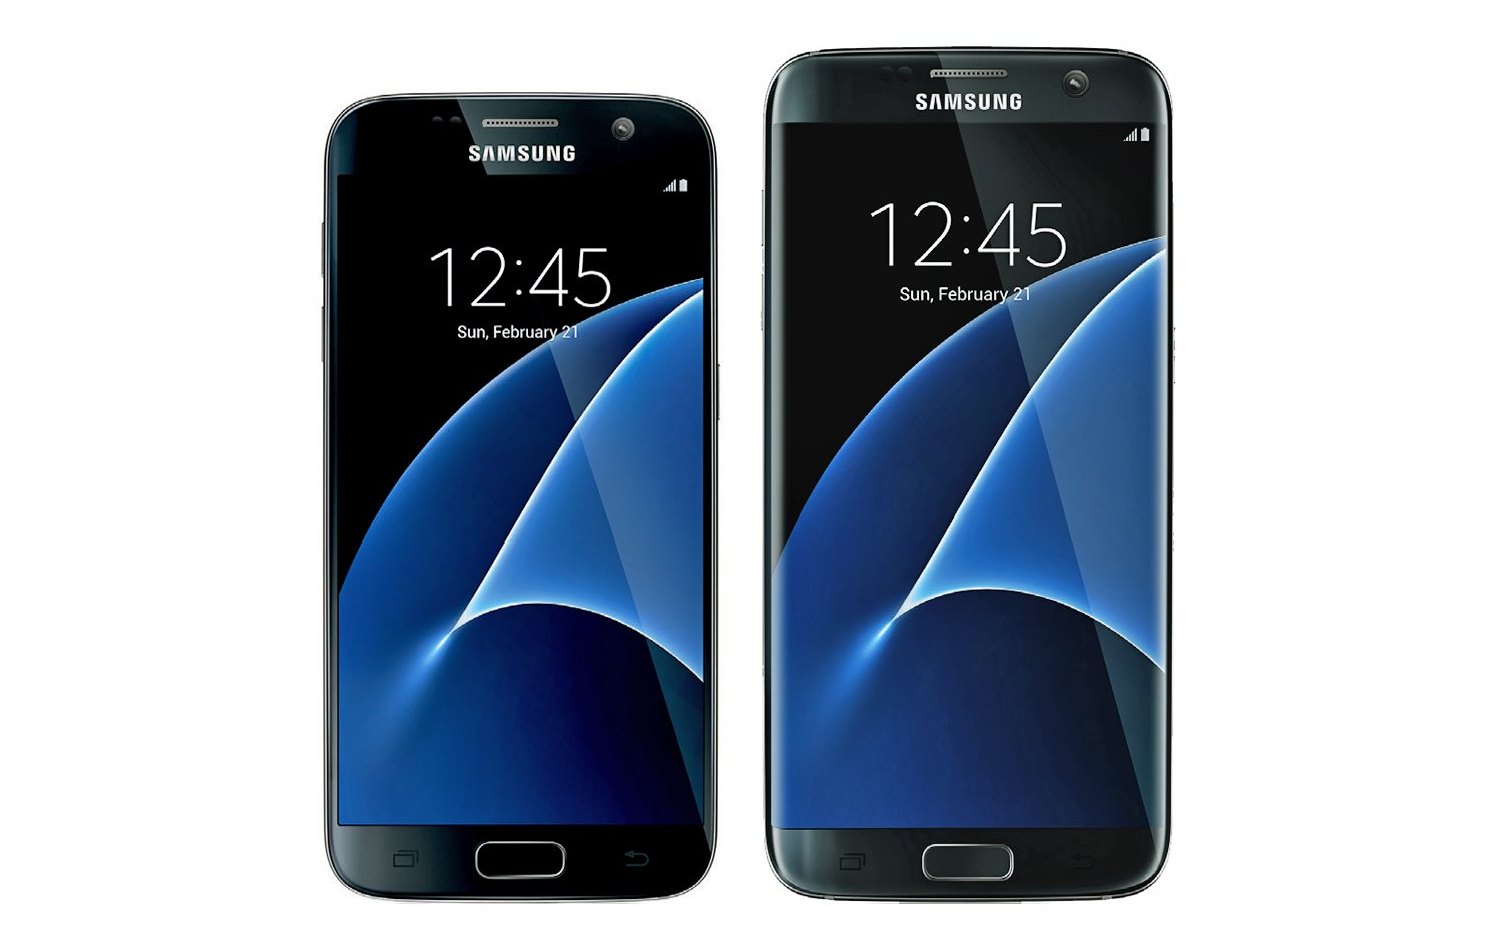 Samsung Galaxy S7 wallpapers - get the